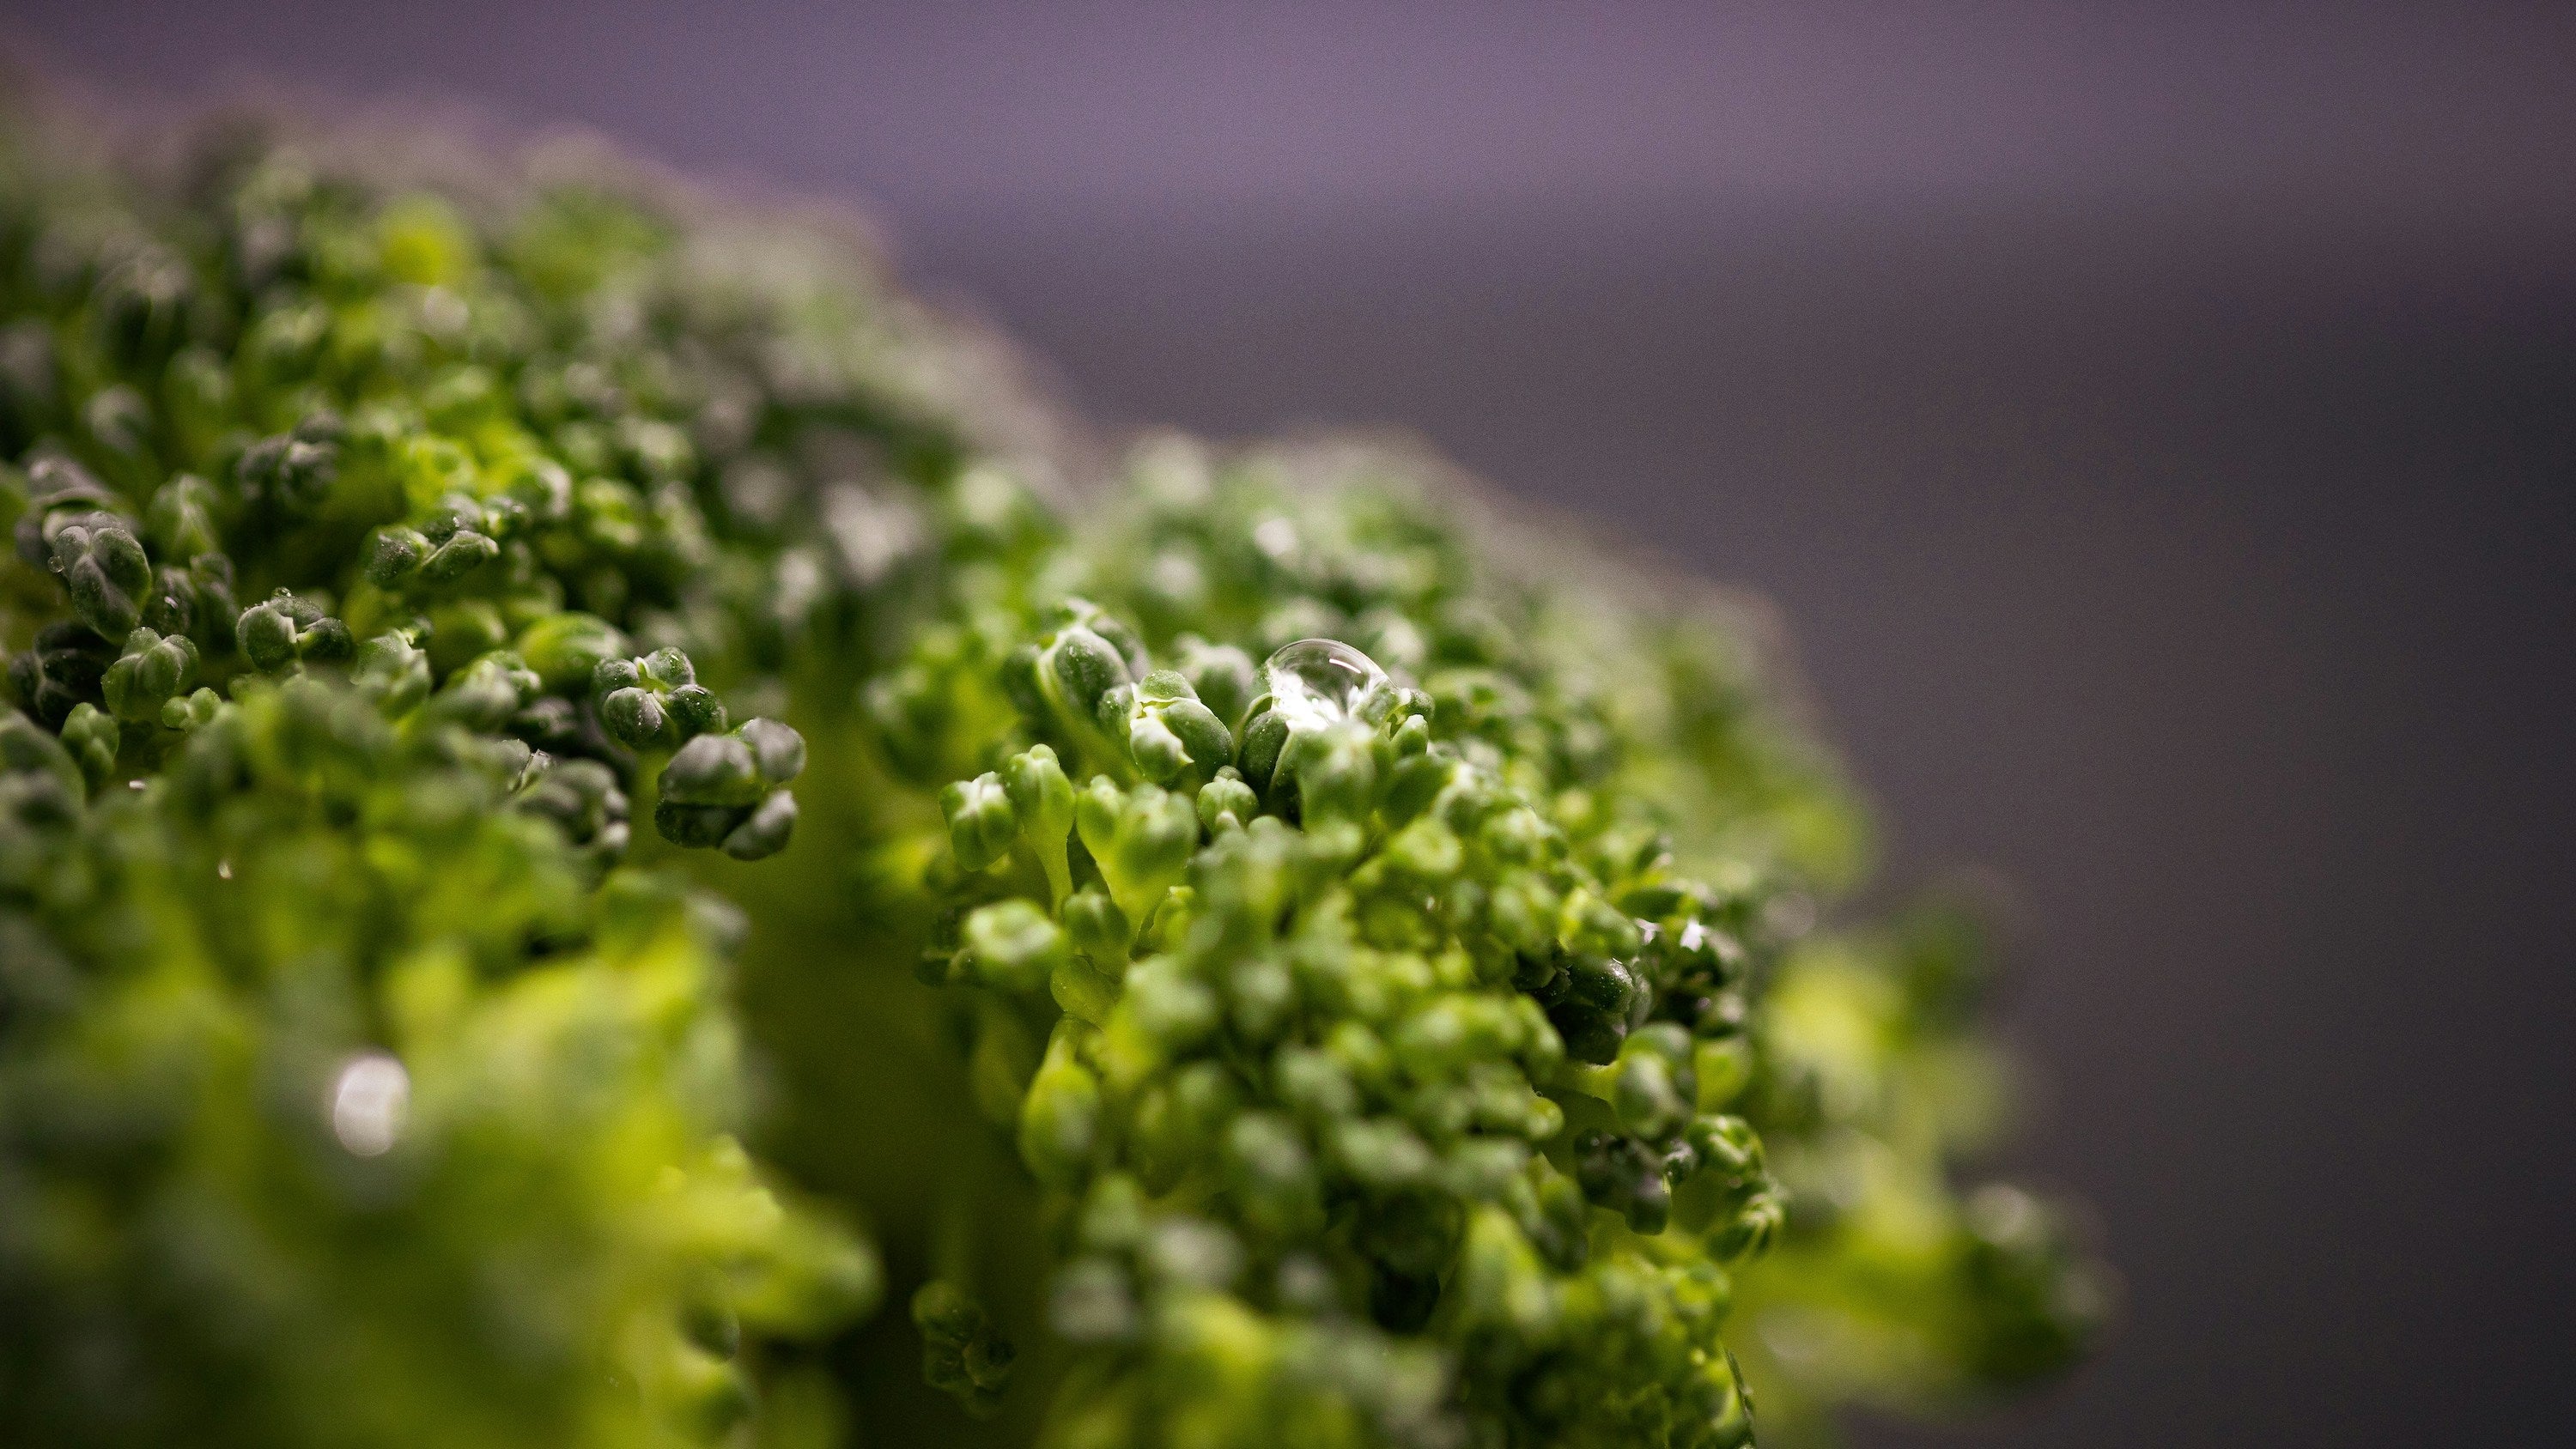 How to 4x broccoli’s anti-cancer properties (pregnancy safe!)